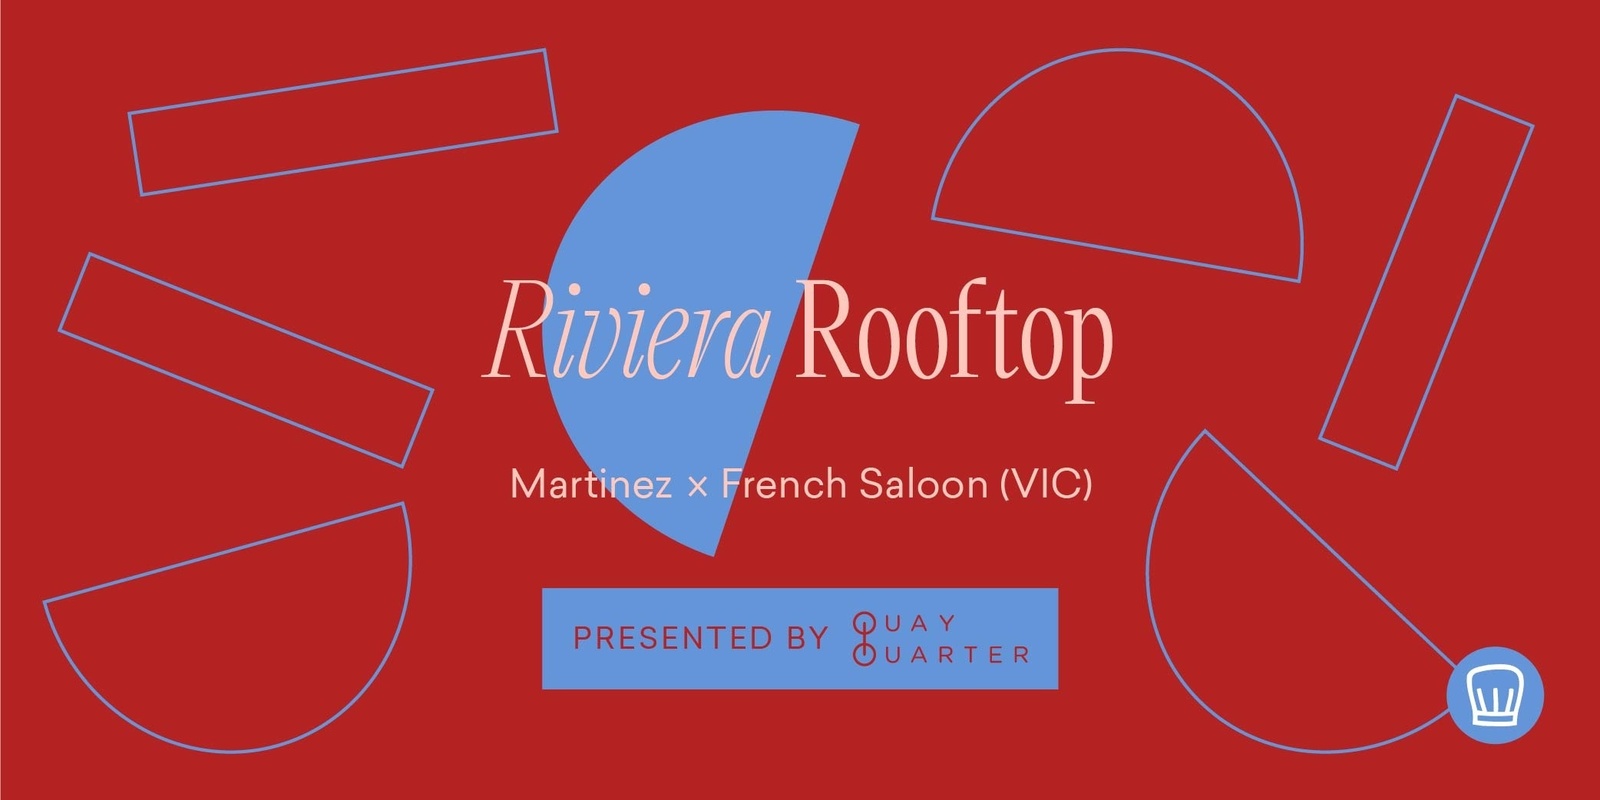 Banner image for Riviera Rooftop Presented by Quay Quarter